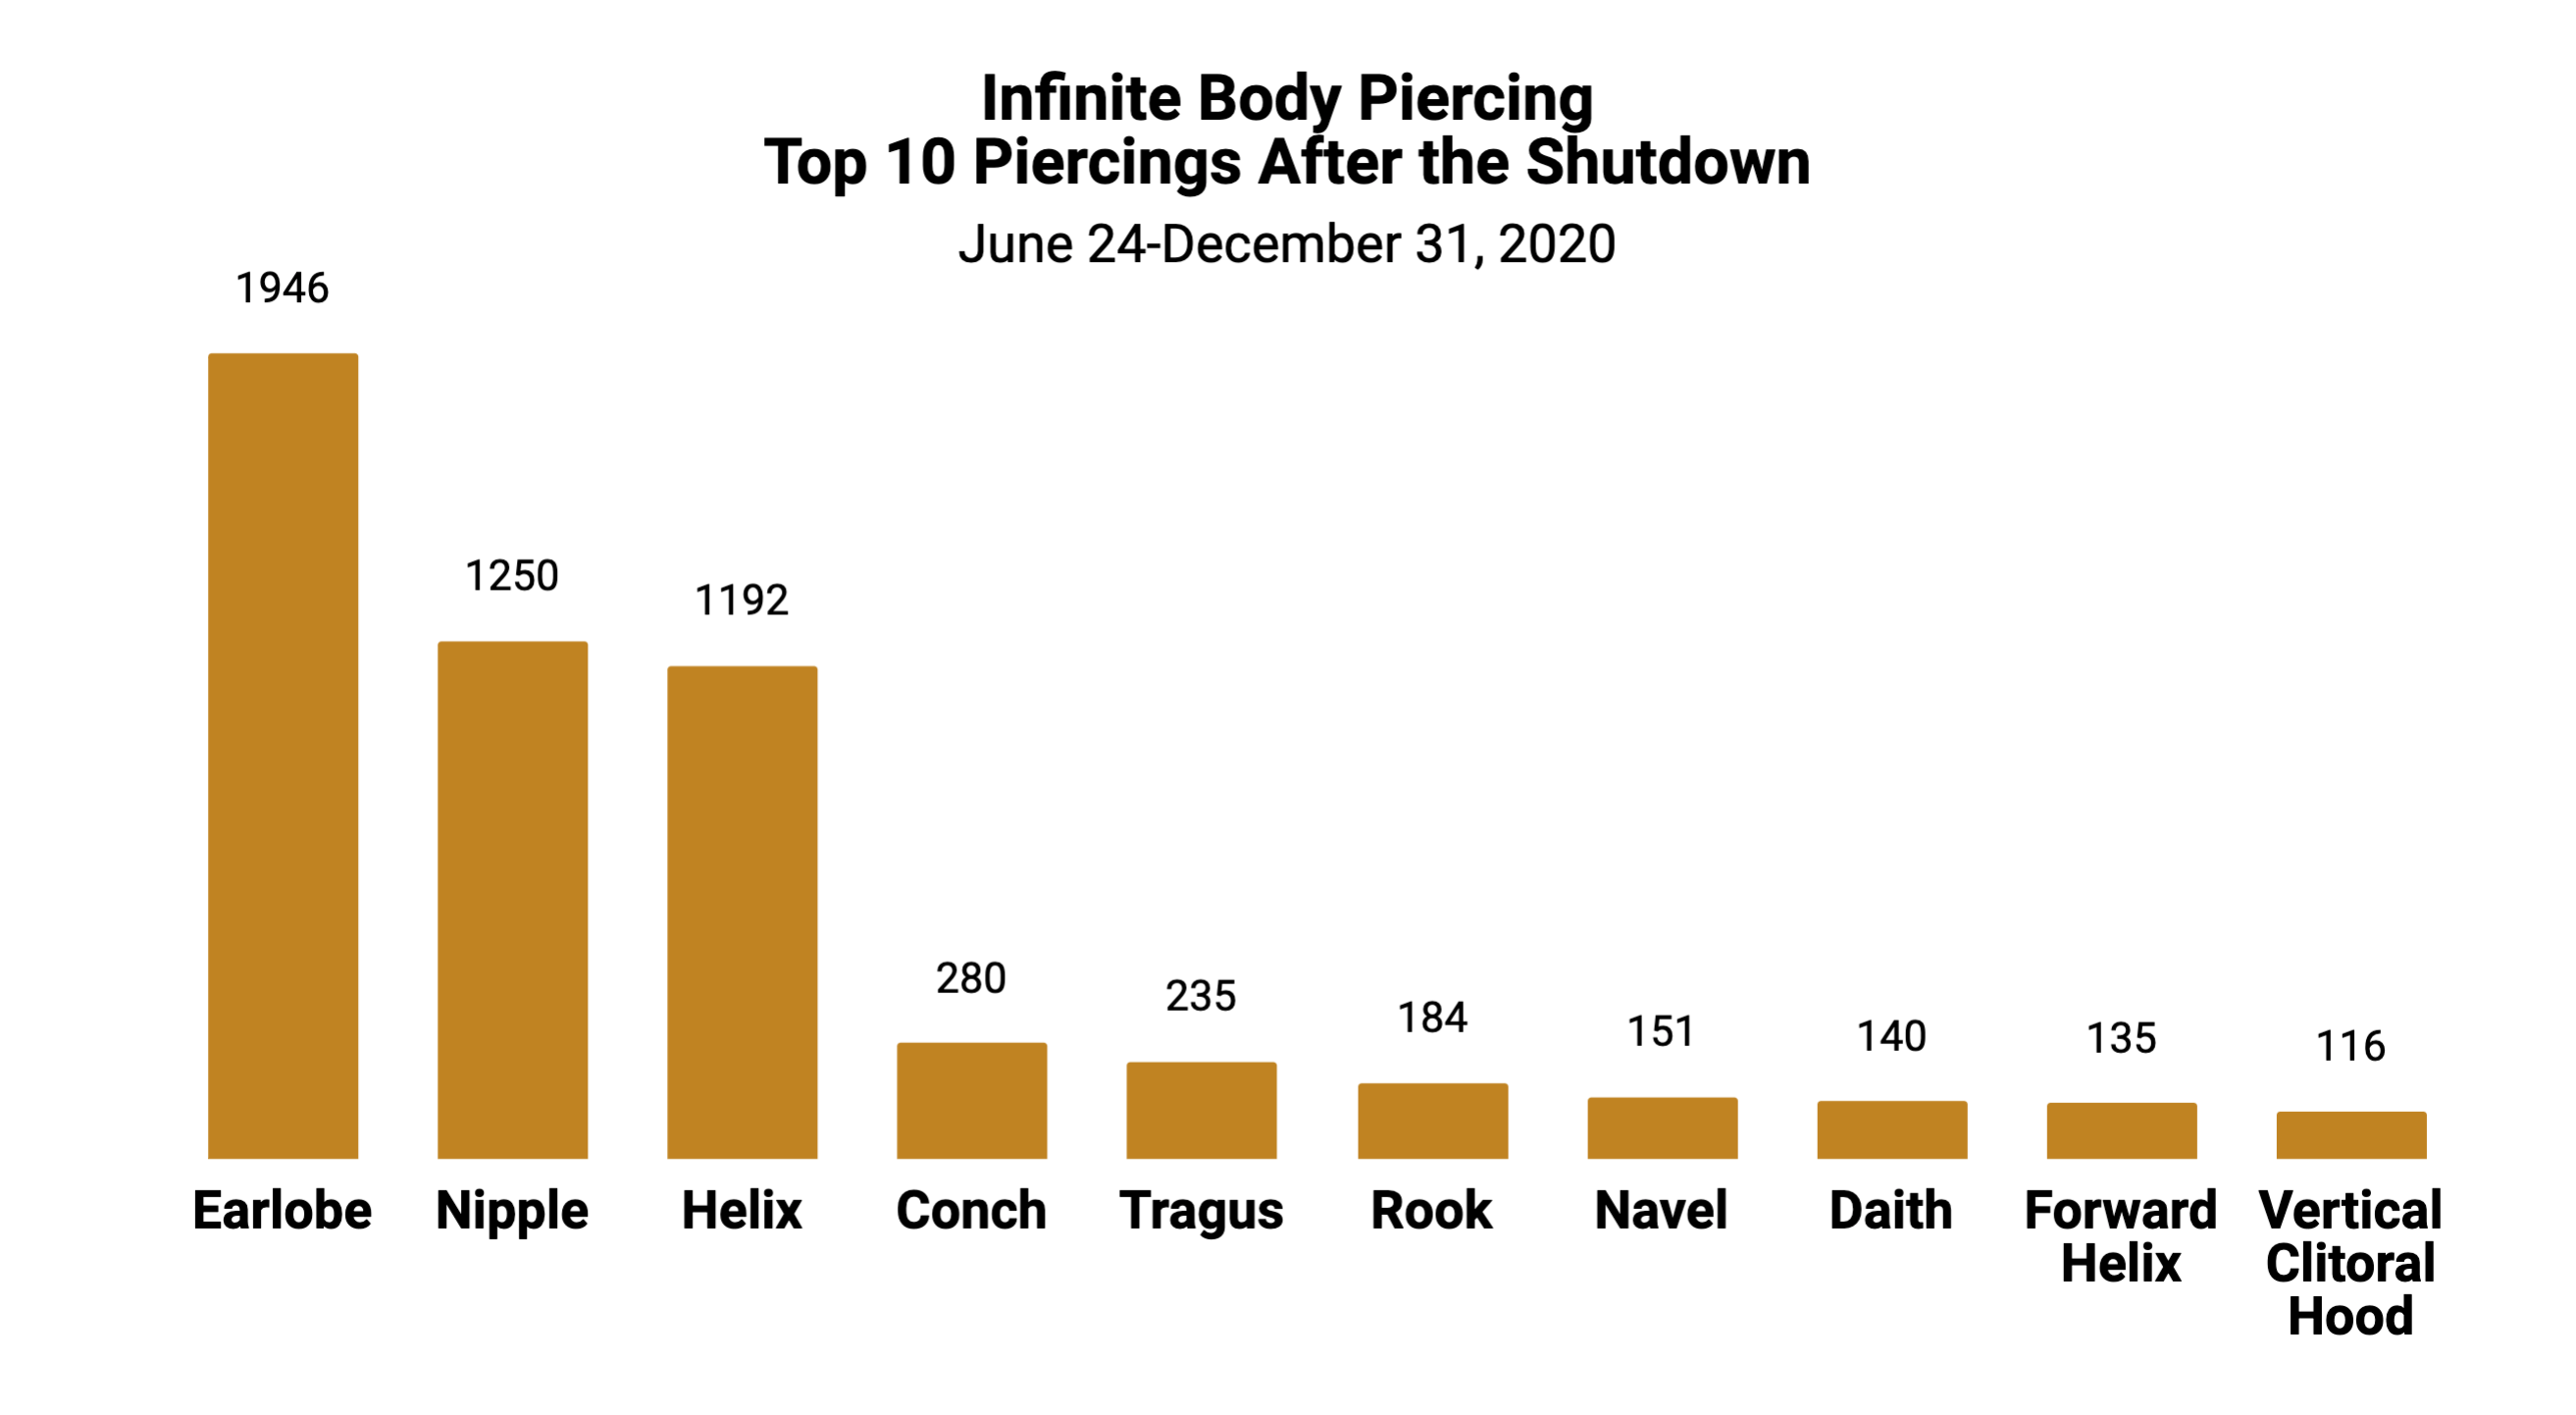 2020 Top 10 Piercings After the Shutdown